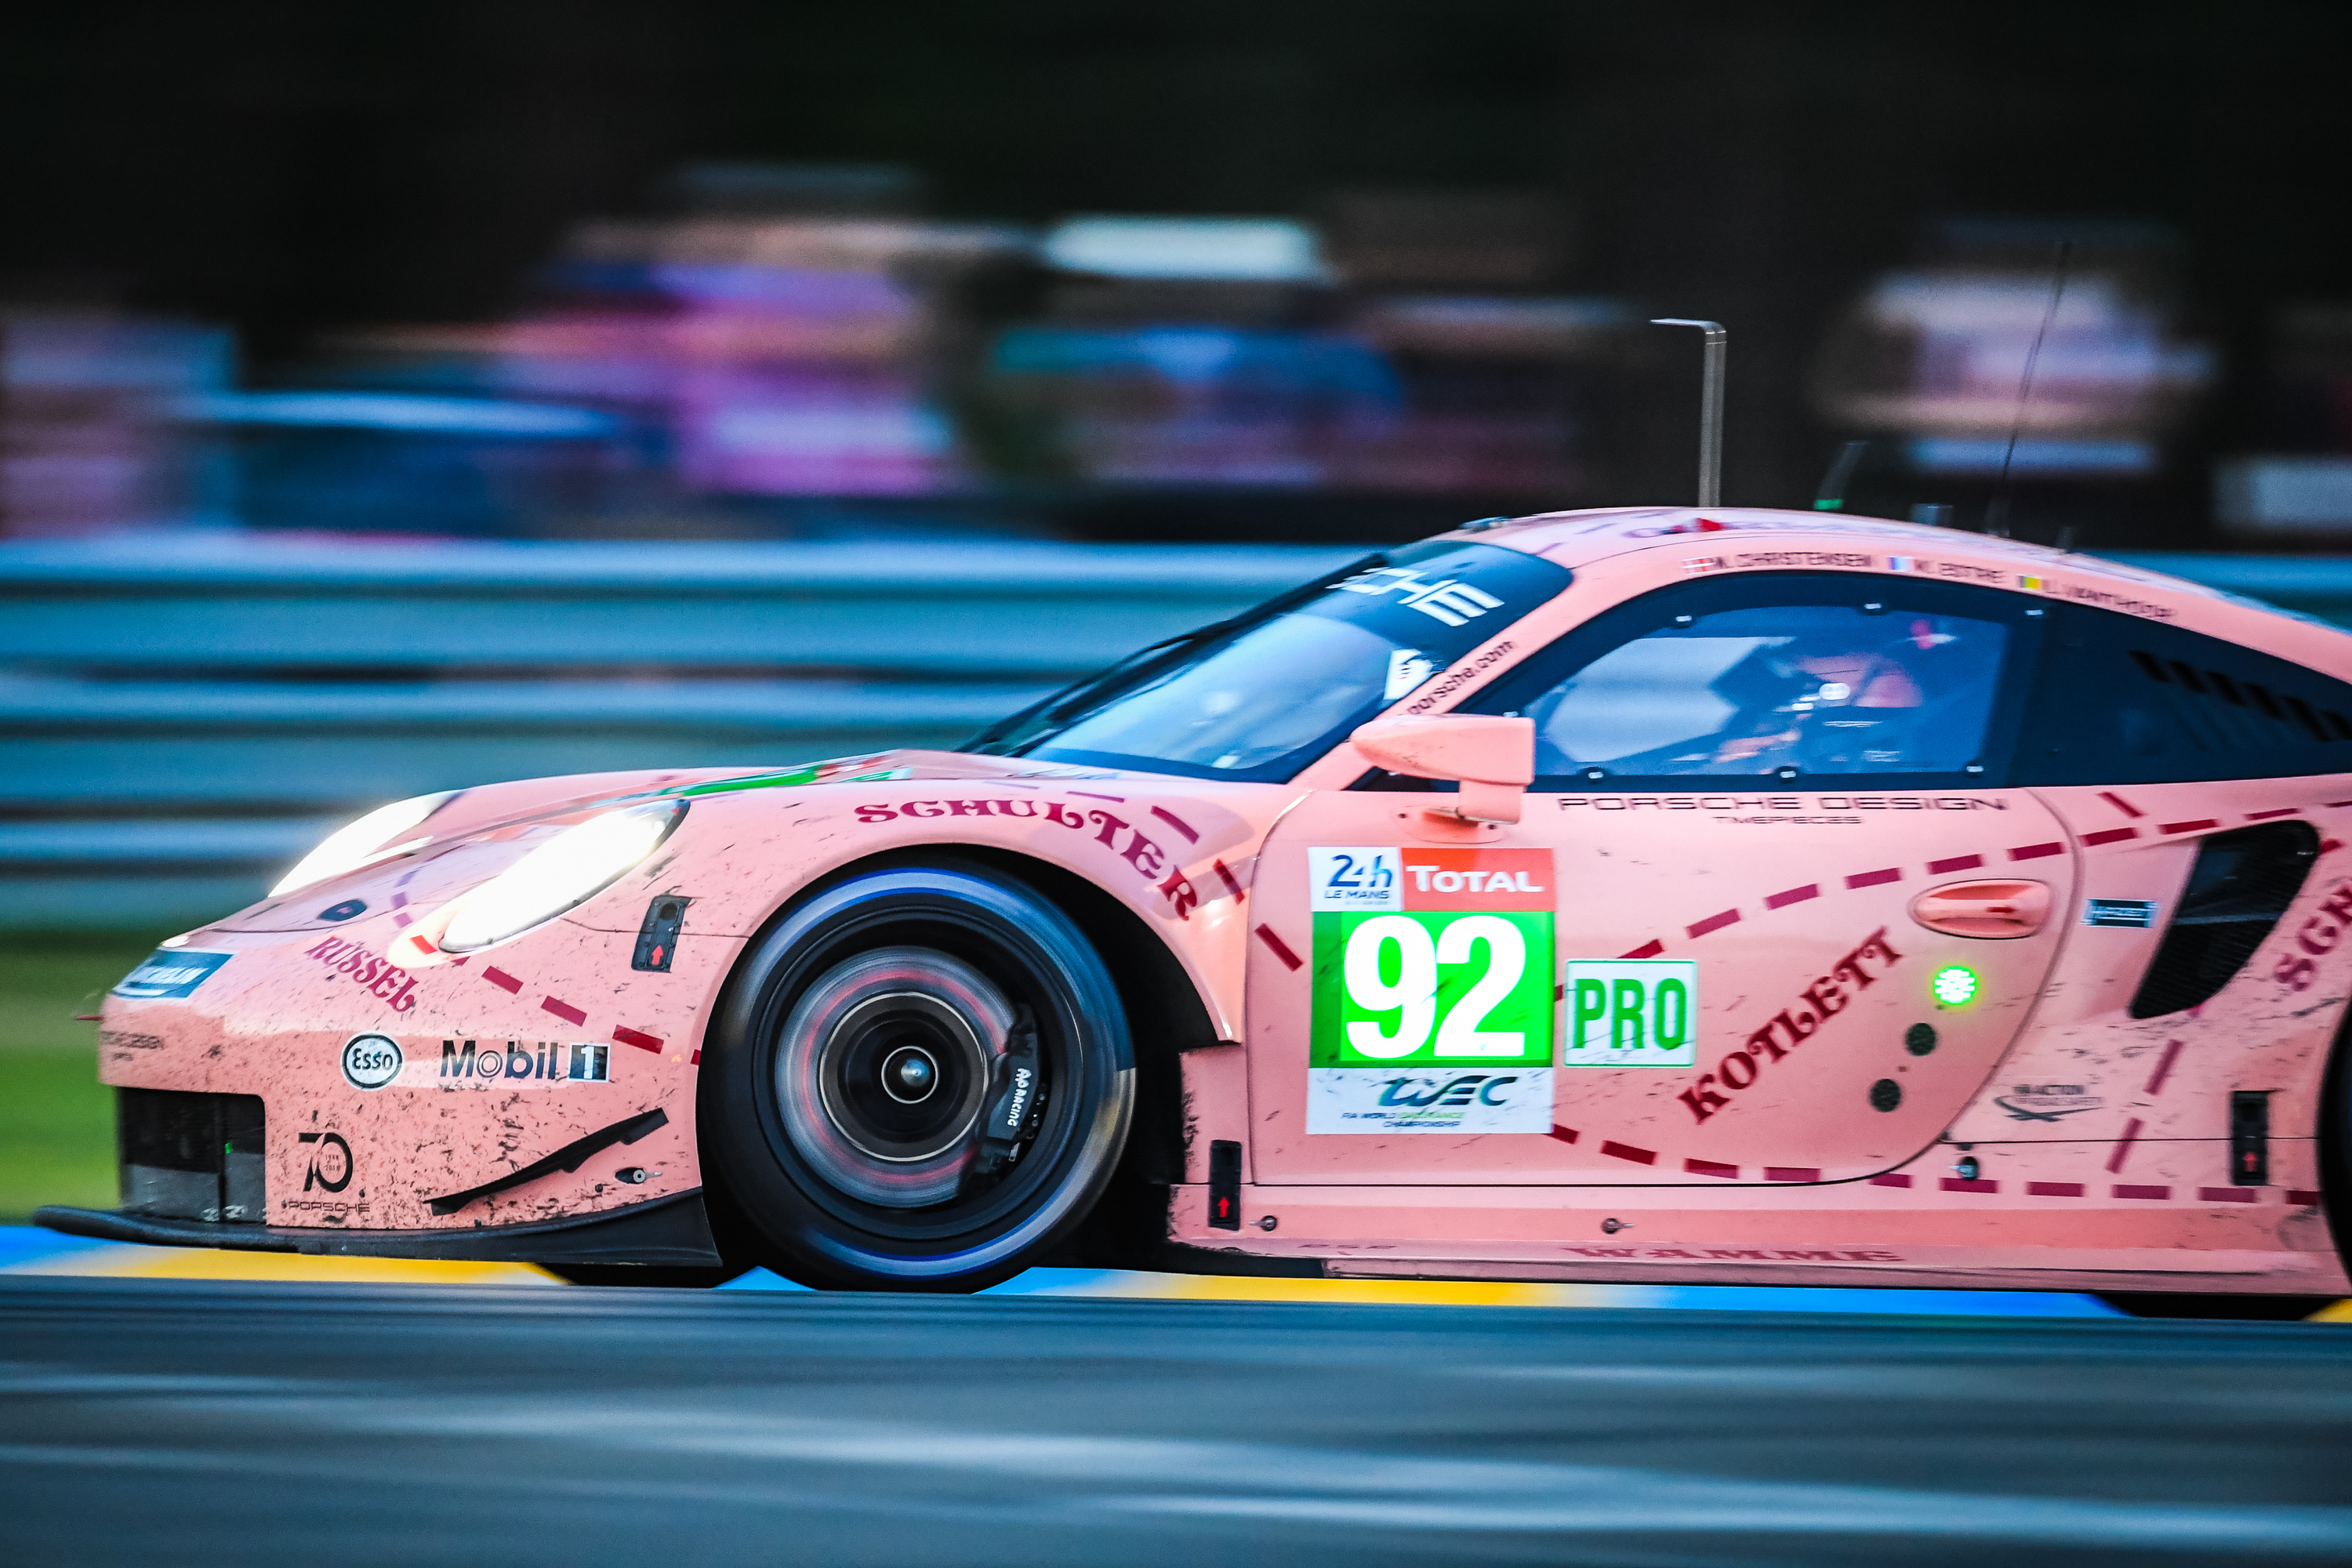 One fast pig as Kévin Estre, Michael Christensen and Laurens Vanthoor steered it to victory in the LM GTE Pro class!